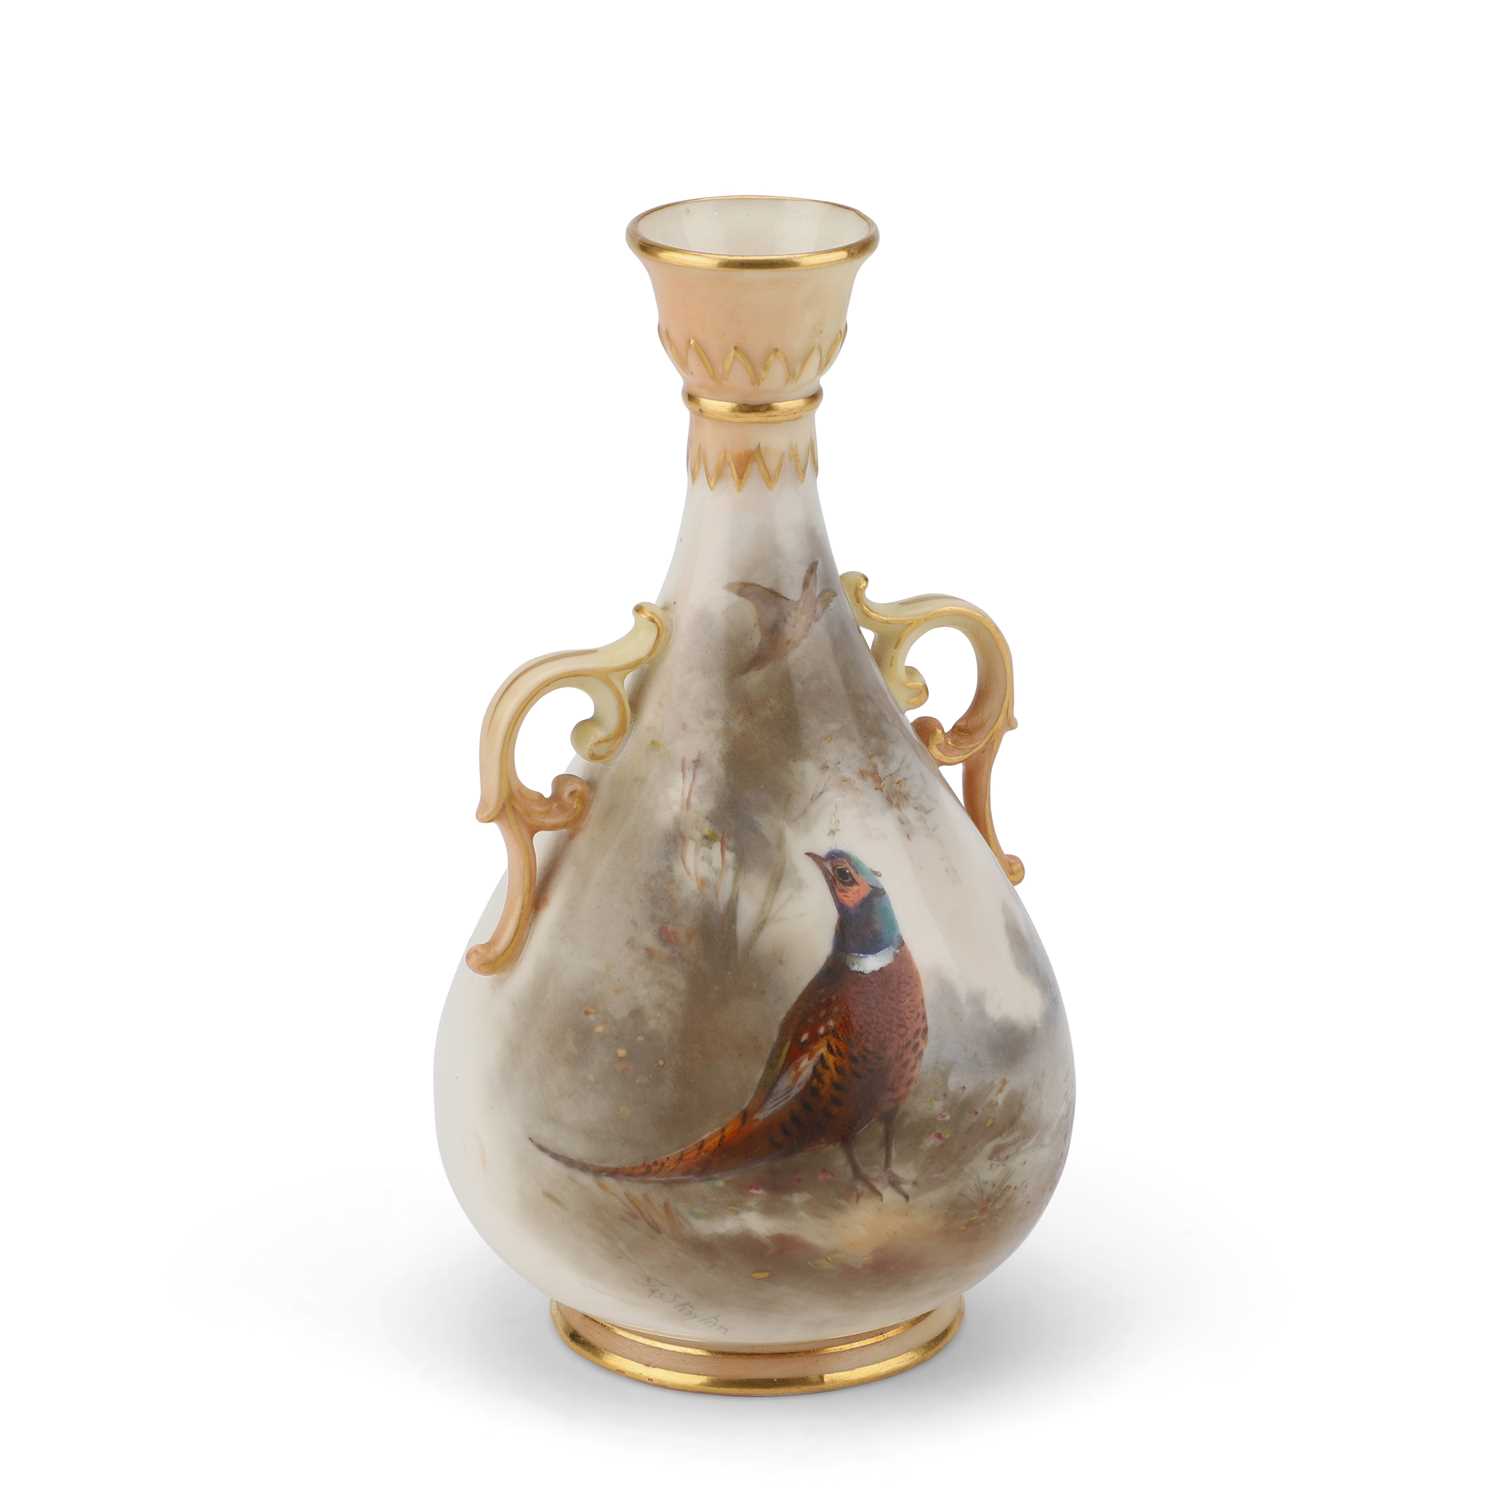 A ROYAL WORCESTER VASE BY JAMES STINTON, DATED 1904